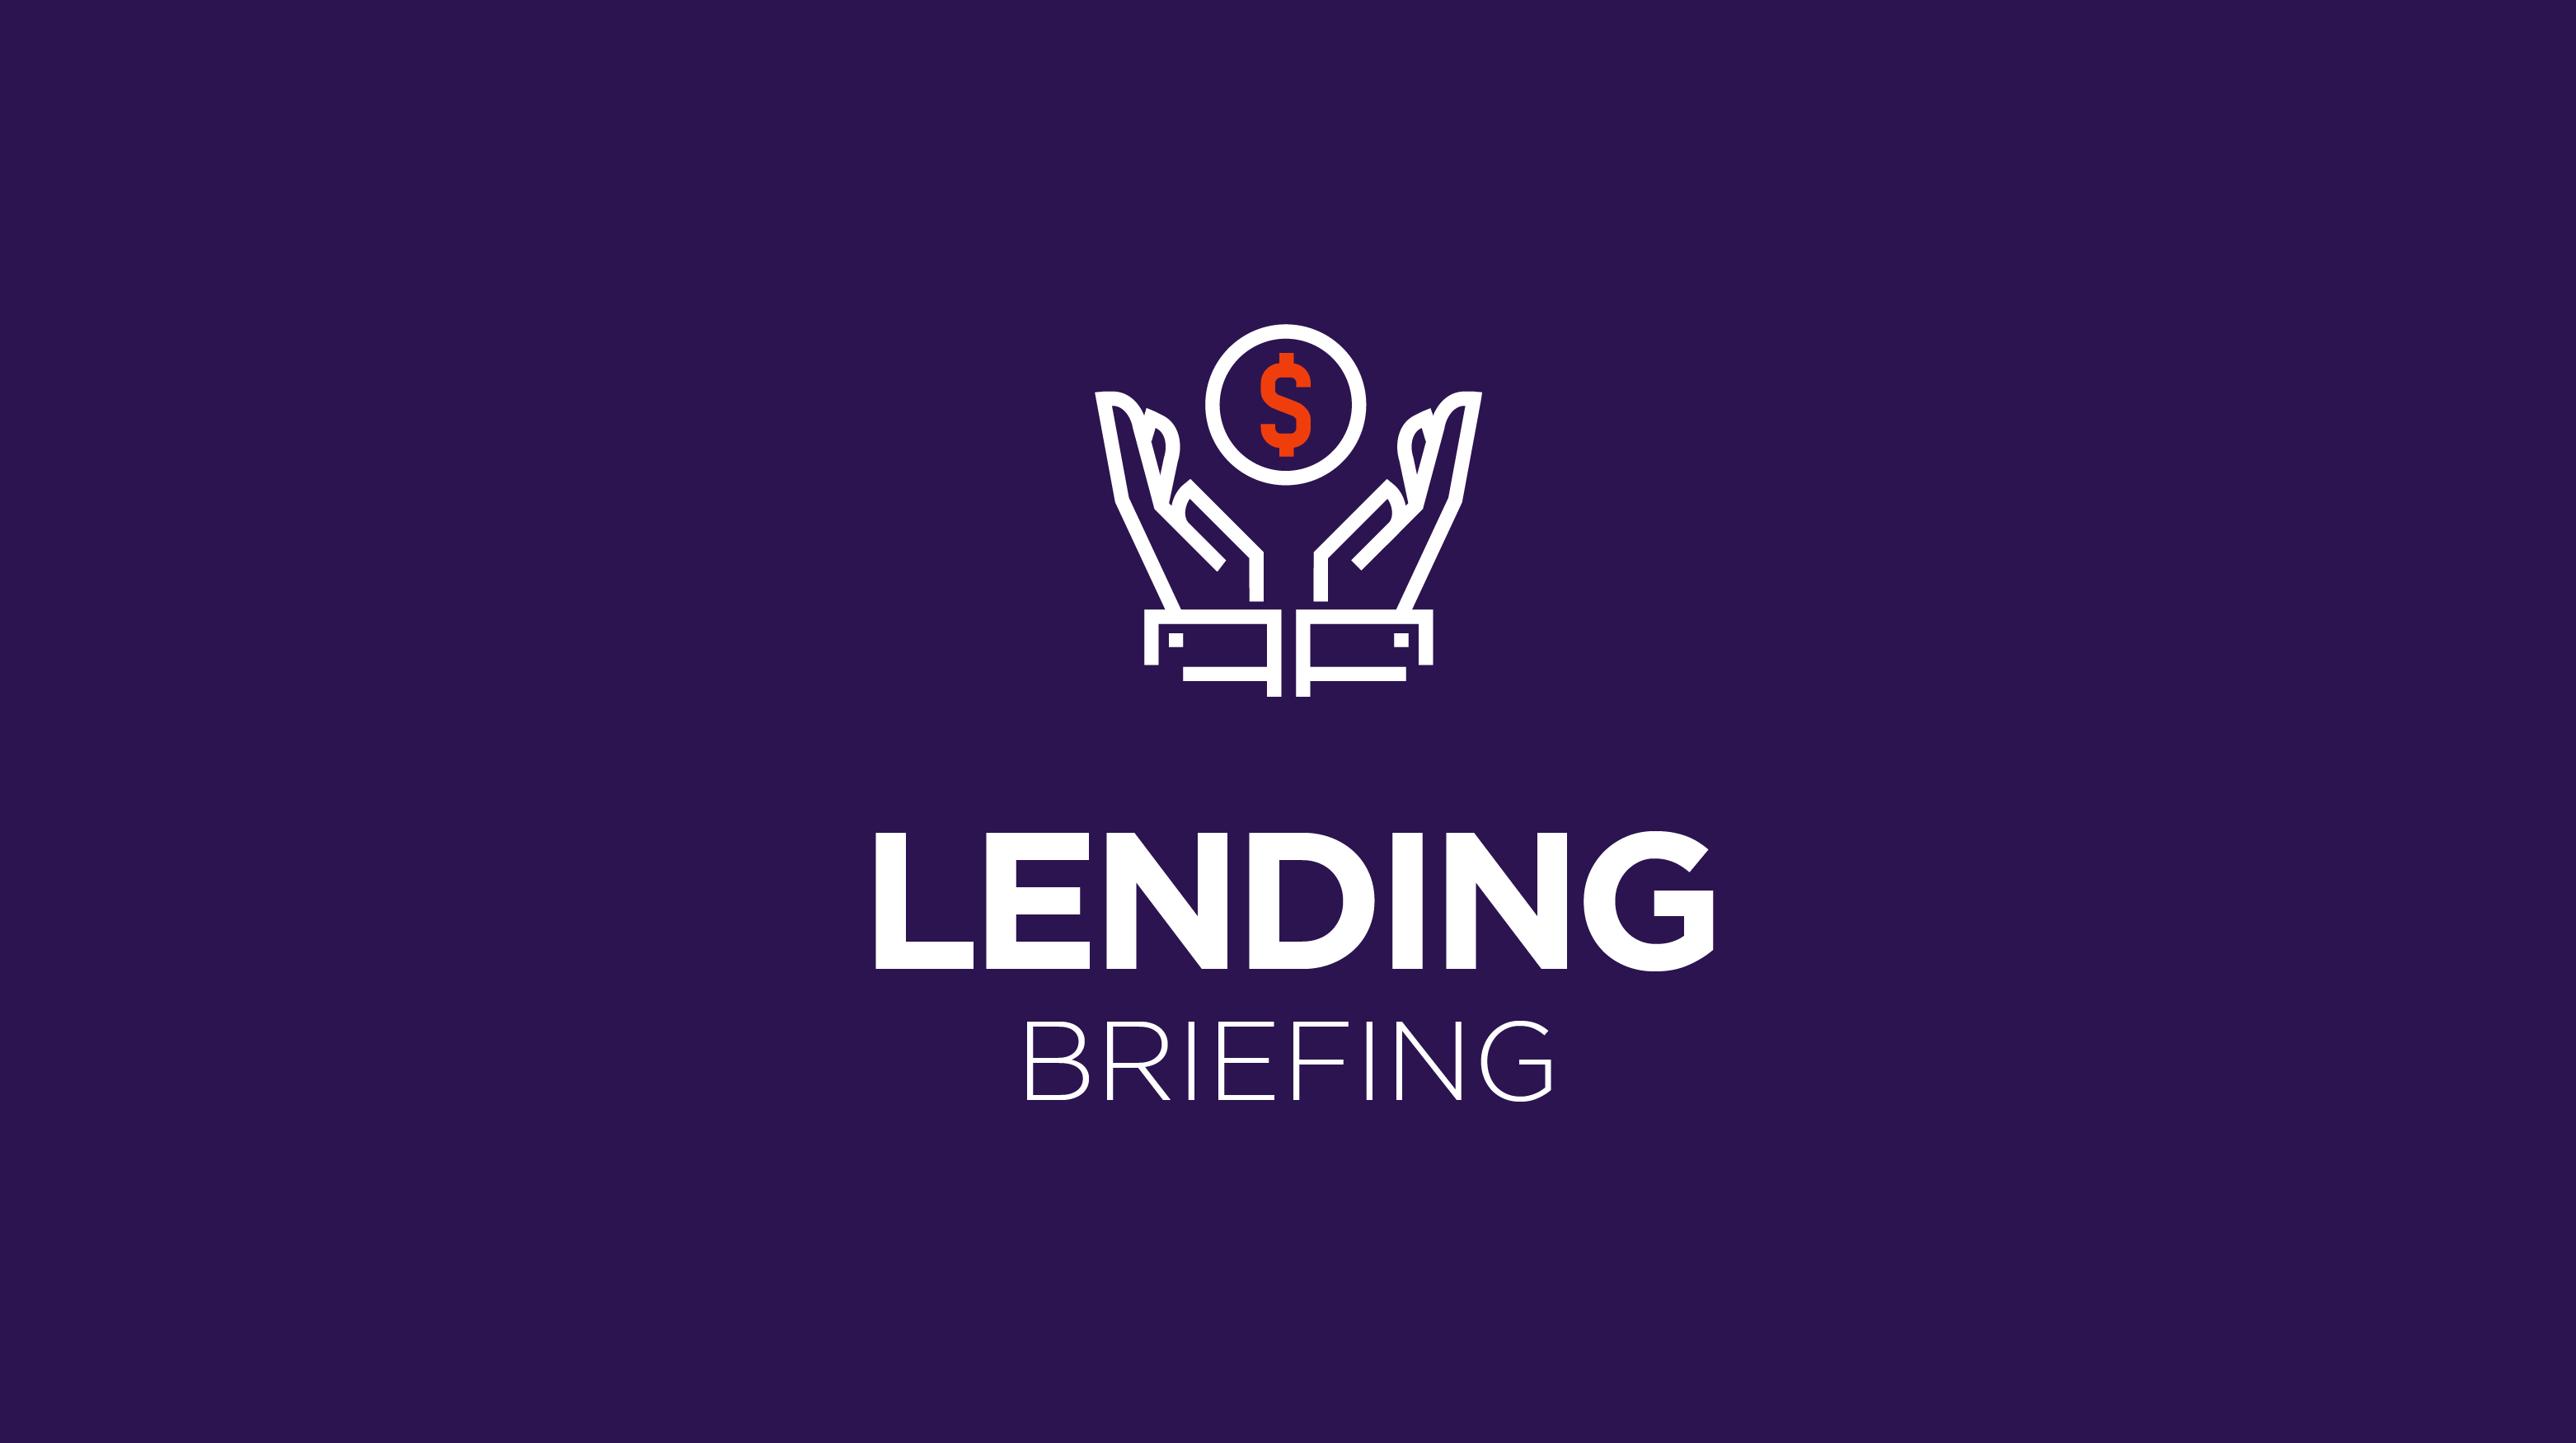 Lending Briefing: The 2021 credit market recovery and Klarna’s annual results